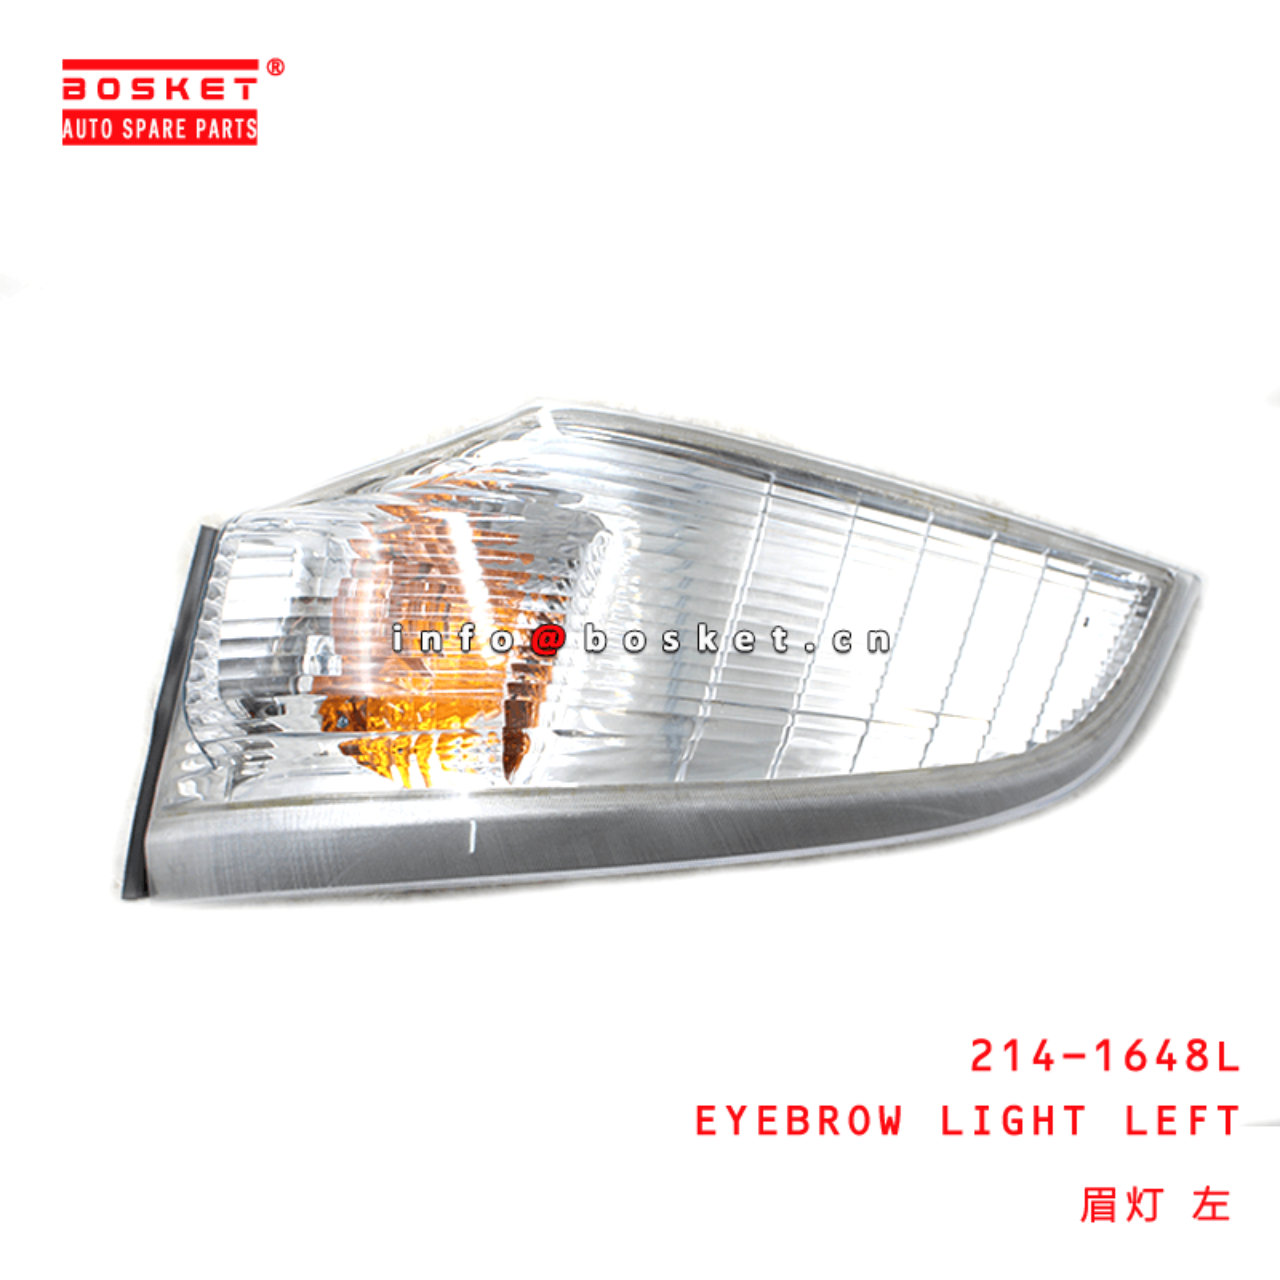 214-1648L Eyebrow Light Left Suitable For MITSUBISHI FUSO 